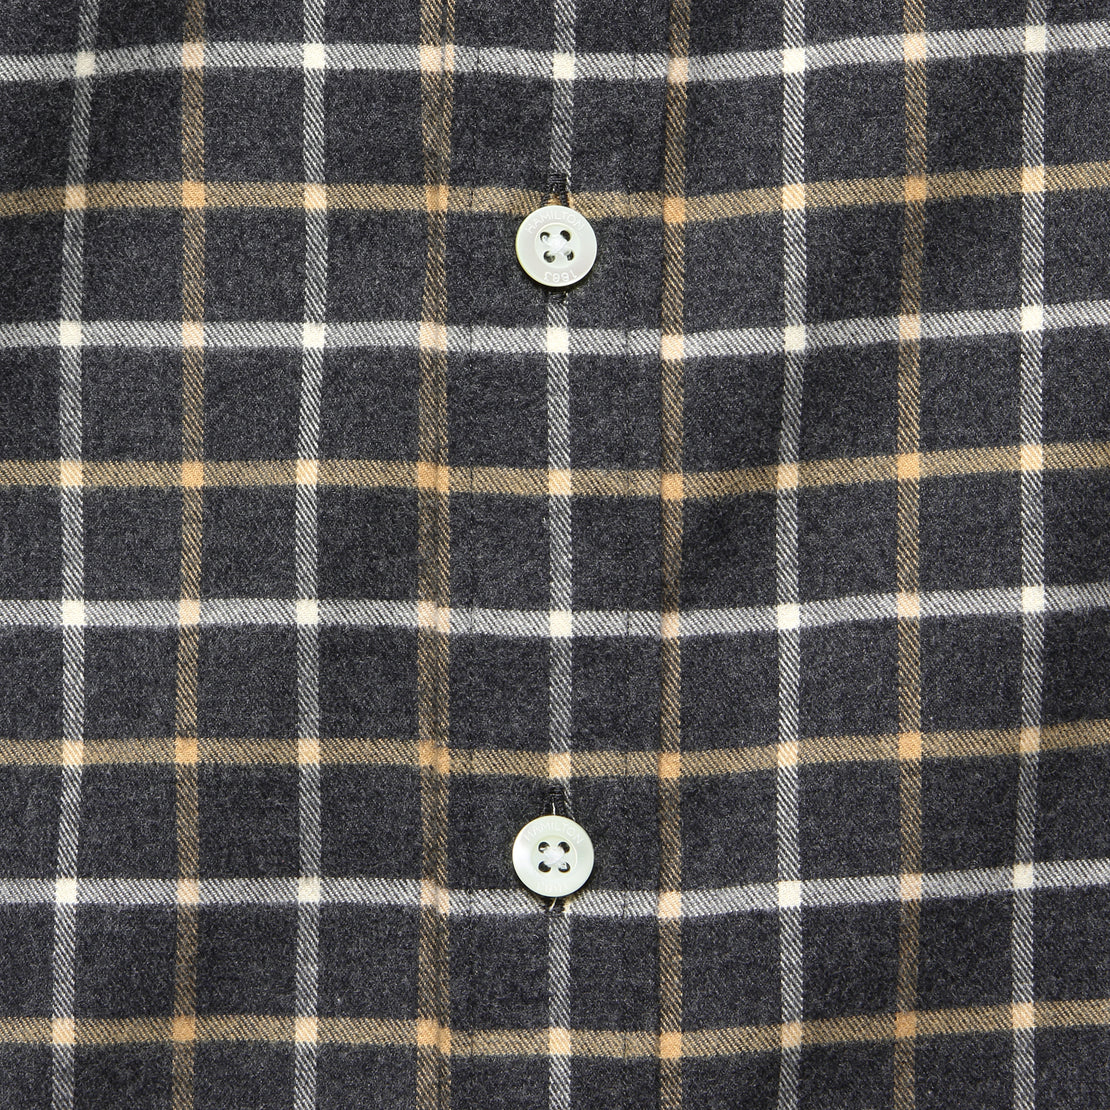 Check Brushed Flannel Shirt - Charcoal/Tan/Cream - Hamilton Shirt Co. - STAG Provisions - Tops - L/S Woven - Plaid